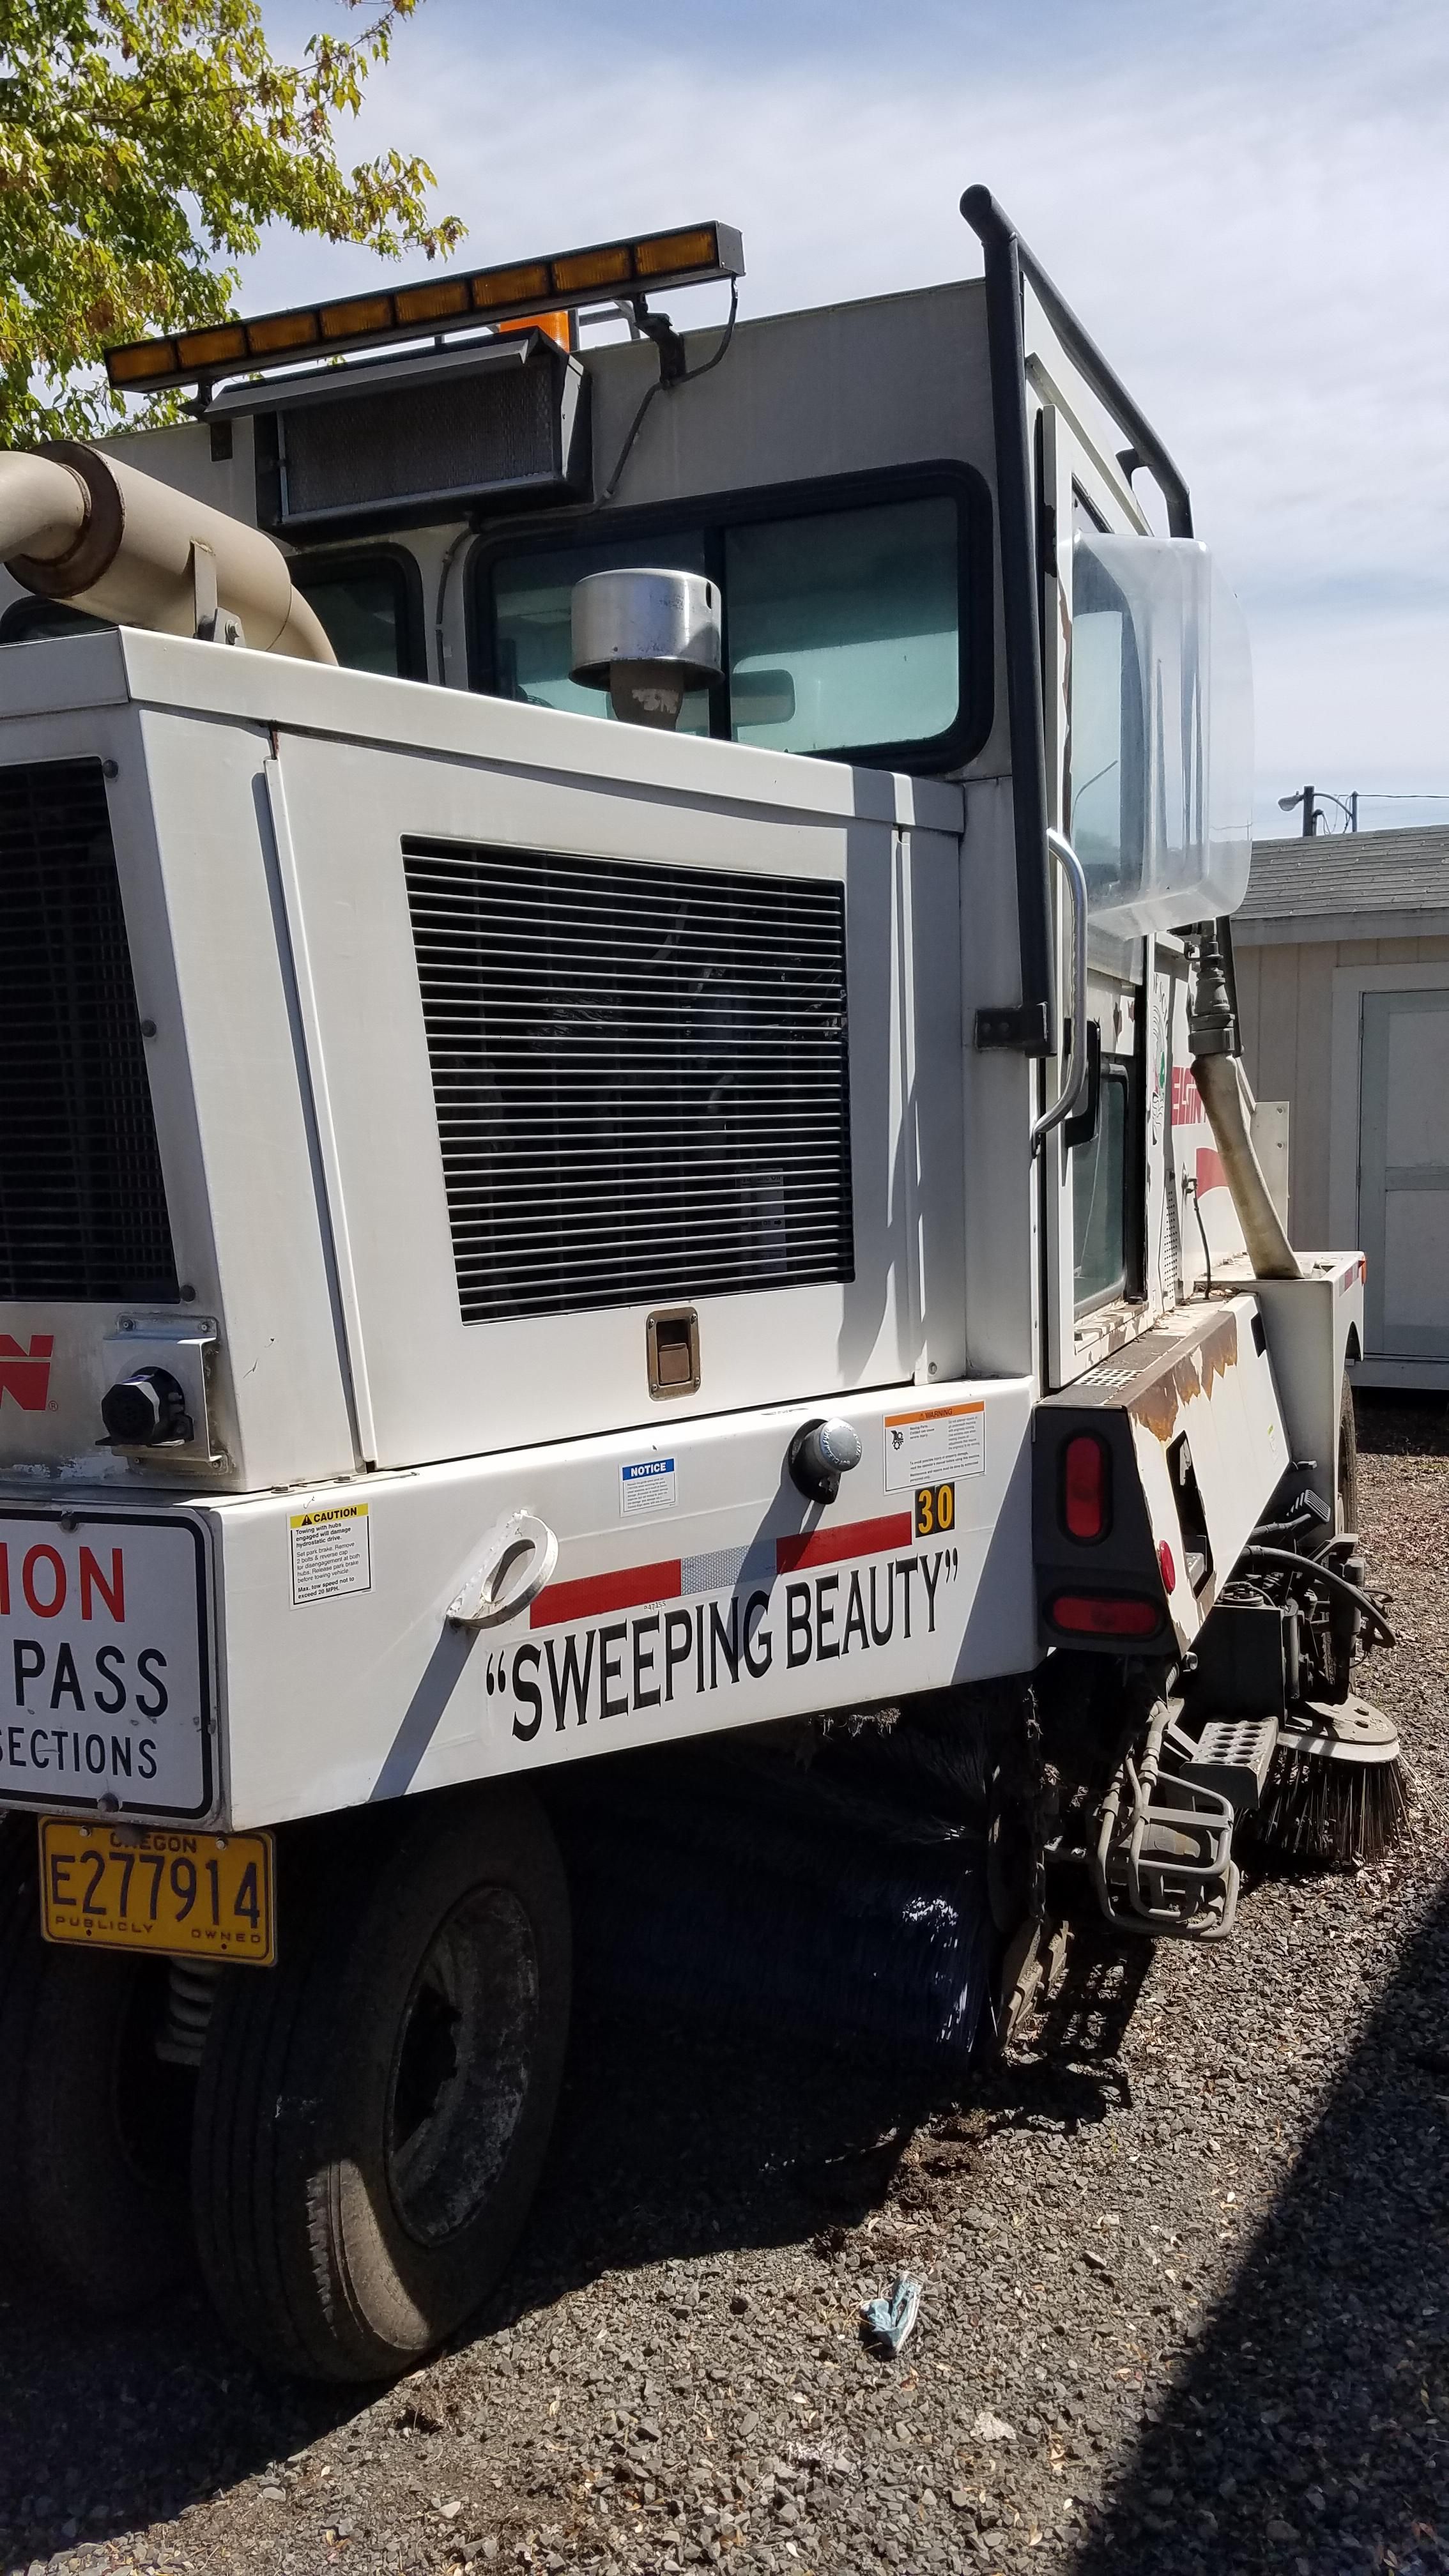 My daughter won our town's "Name the Street Sweeper" contest.